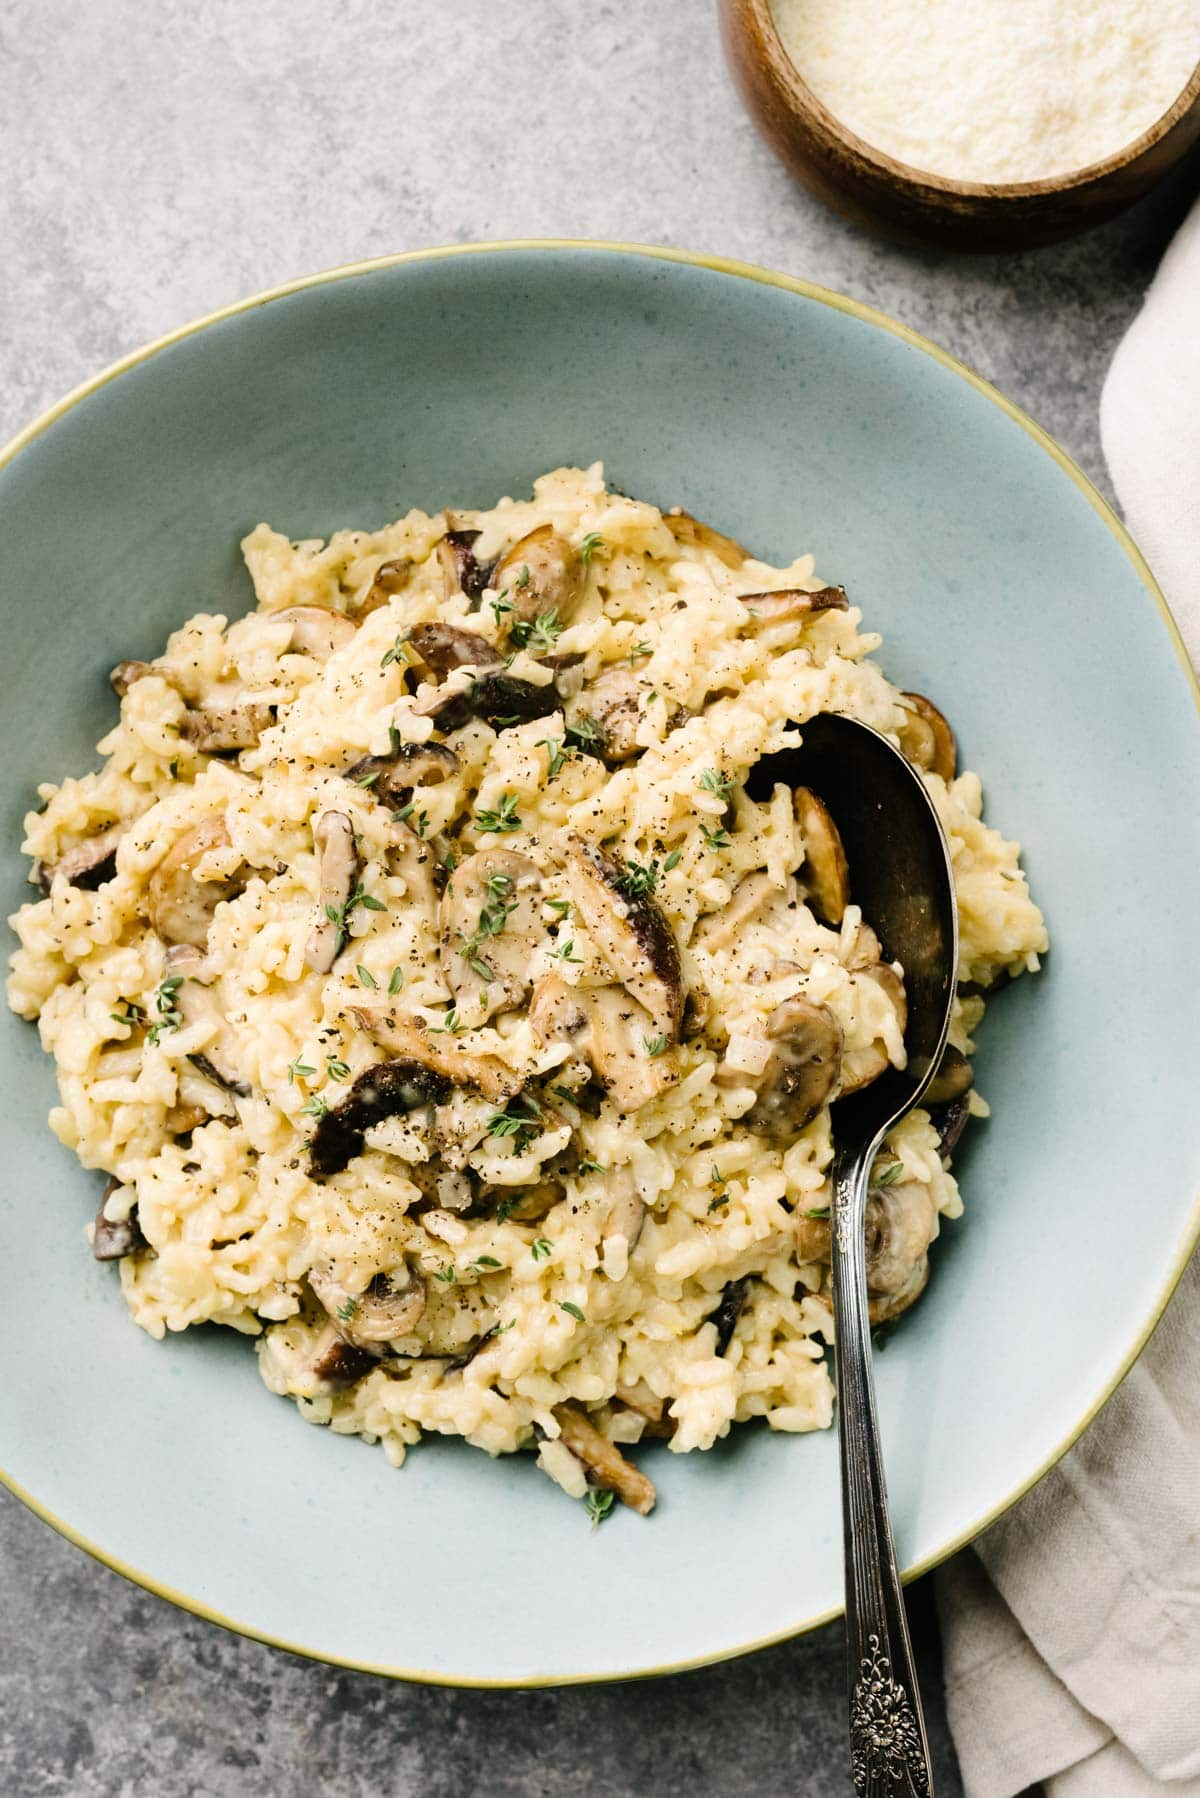 Instant Pot mushroom risotto in a blue serving bowl, garnished with fresh thyme. A serving spoon is tucked into the risotto, with a cream linen napkin and small wood bowl of grated parmesan cheese to the side.